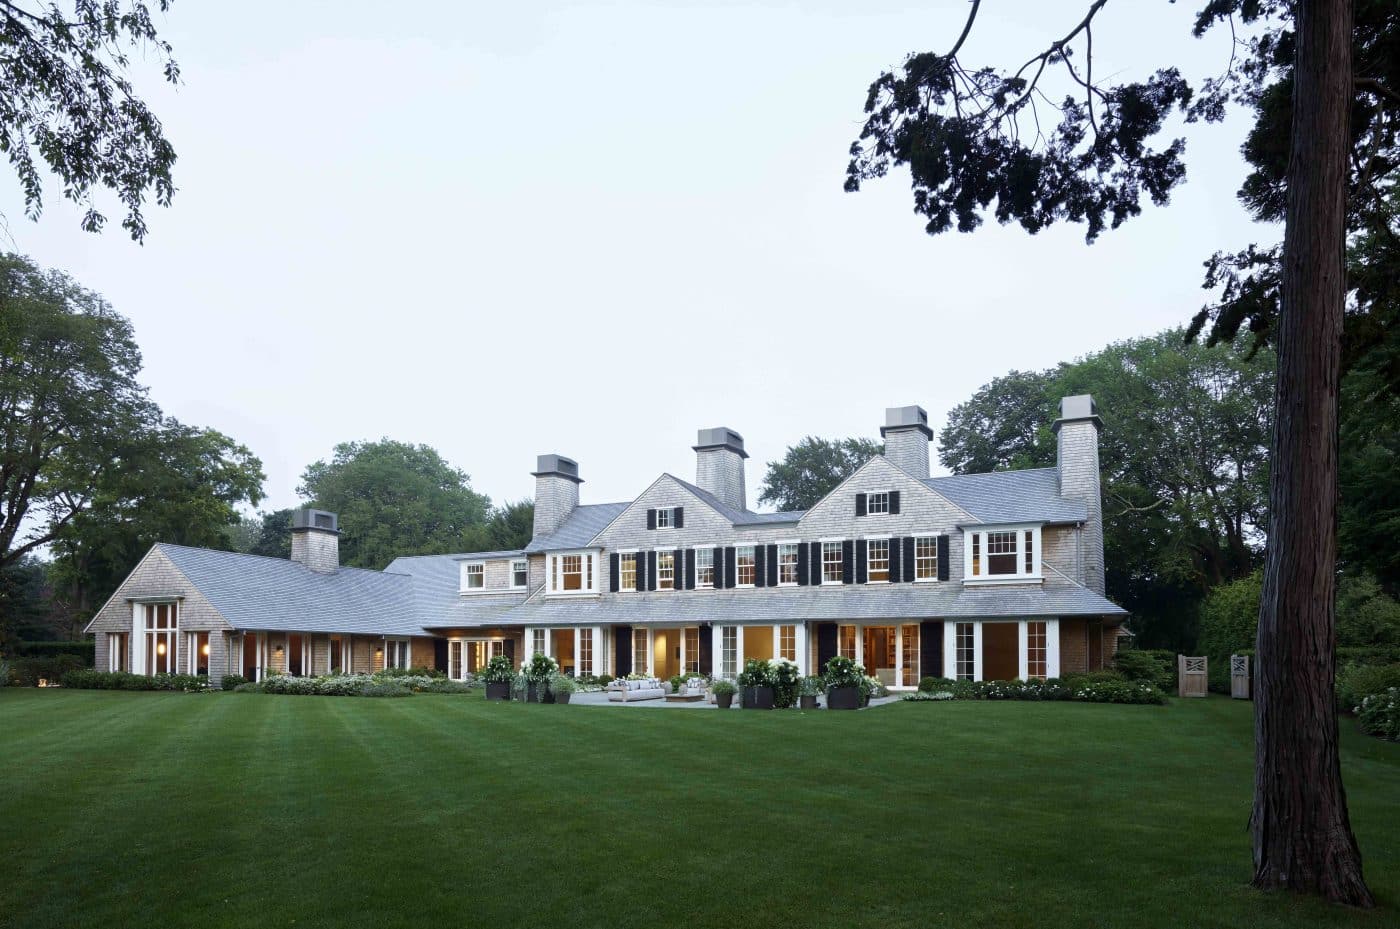 Architect Thomas Kligerman gabled house on East Hampton as seen in his new book Shingle and Stone published by Phaidon imprint The Monacelli Press